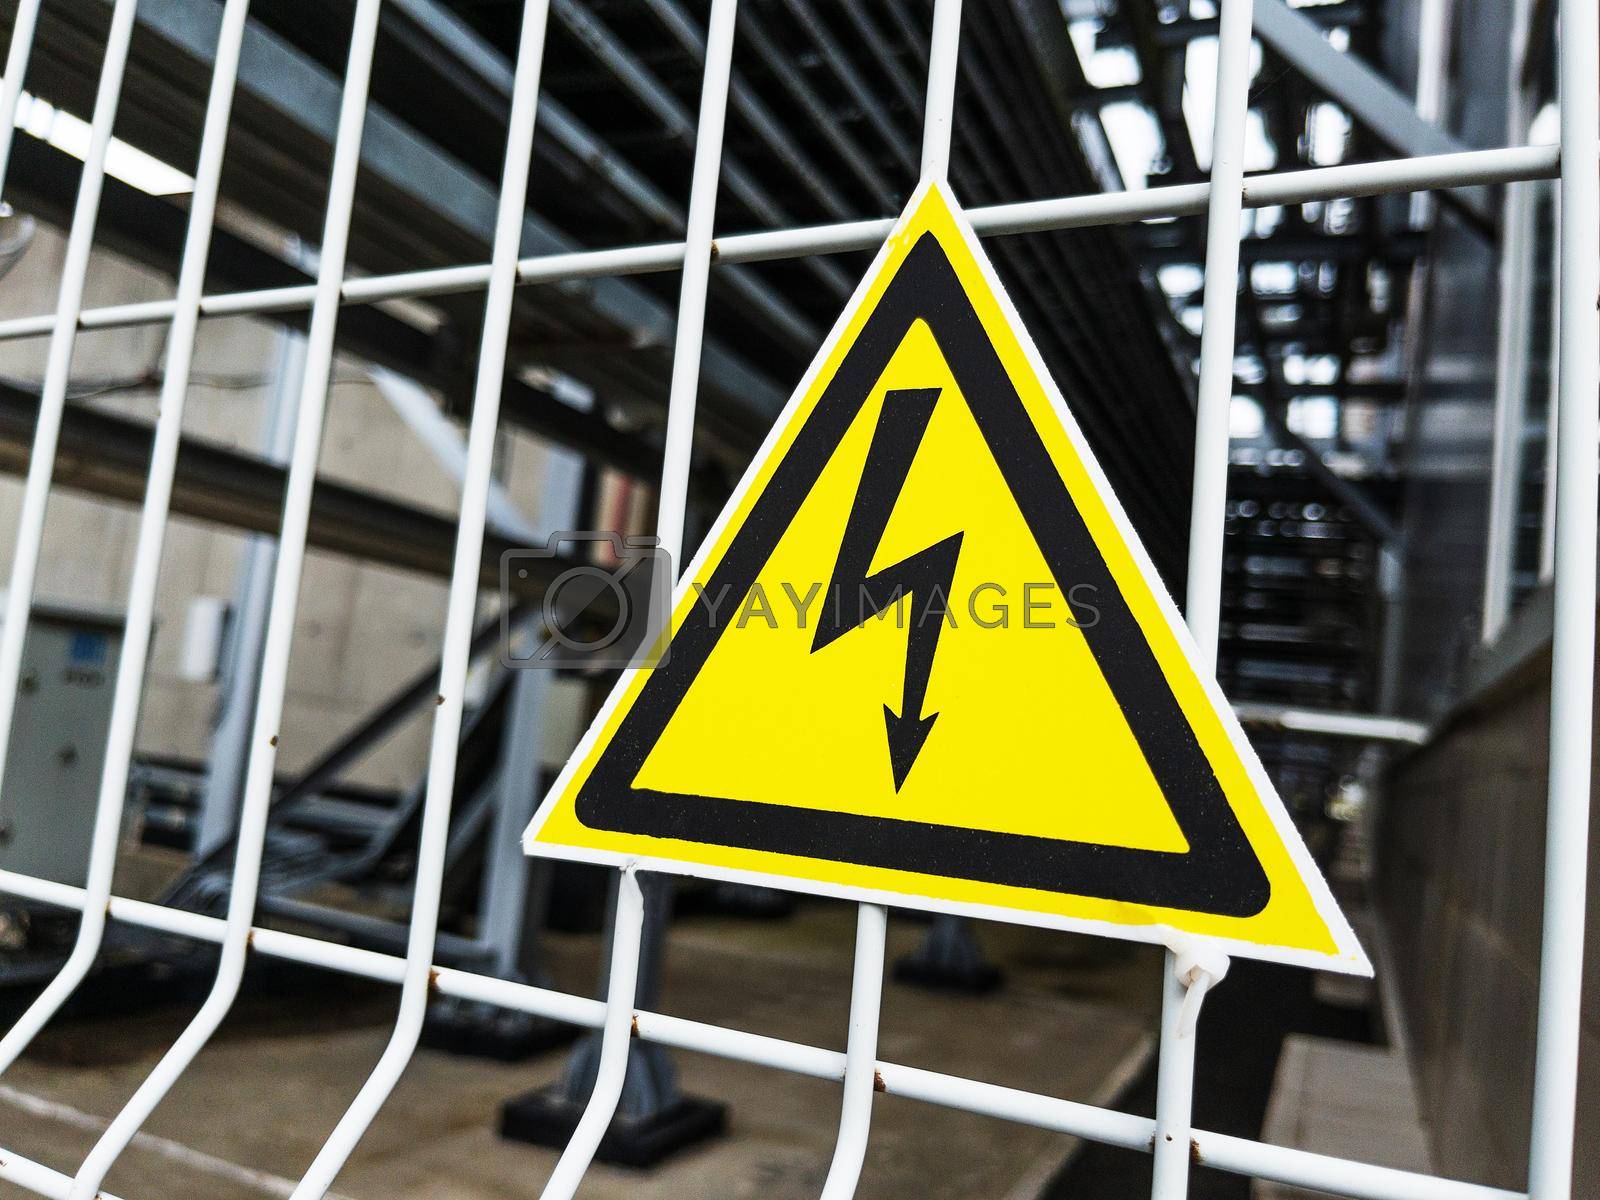 Royalty free image of The sign in the yellow triangle is Danger by AlexGrec